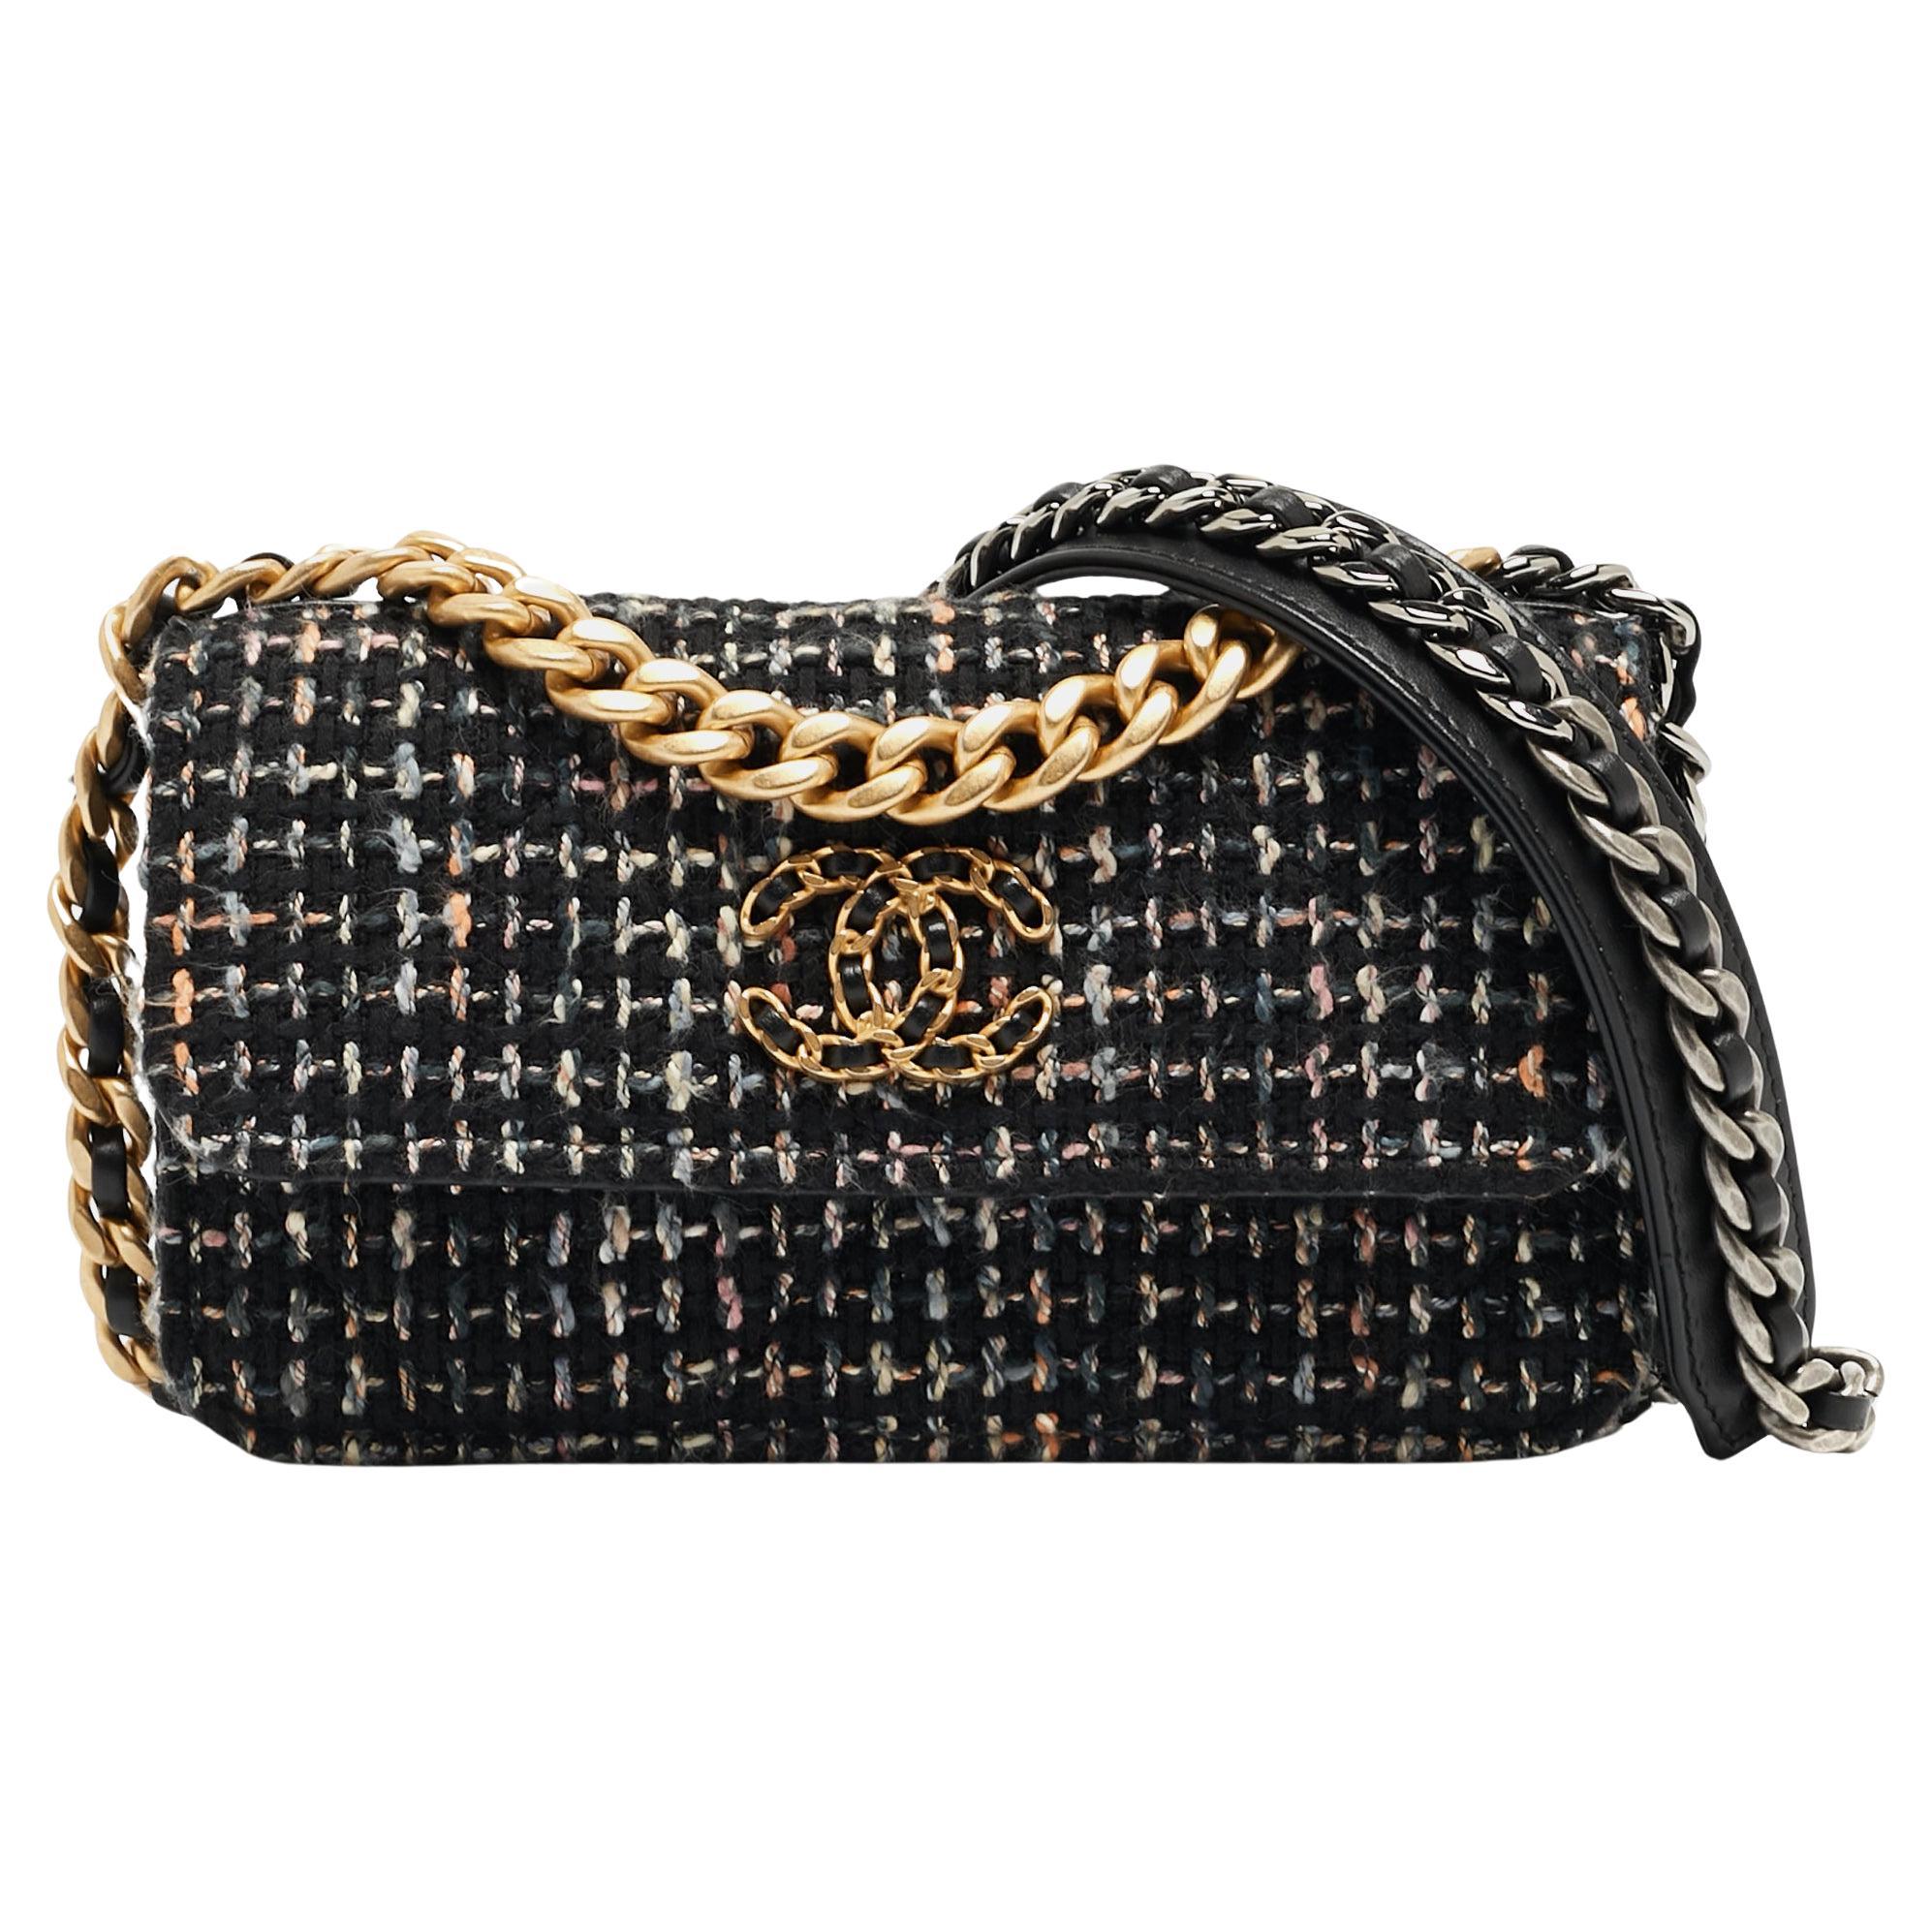 What are the different types of Chanel 19 bags?